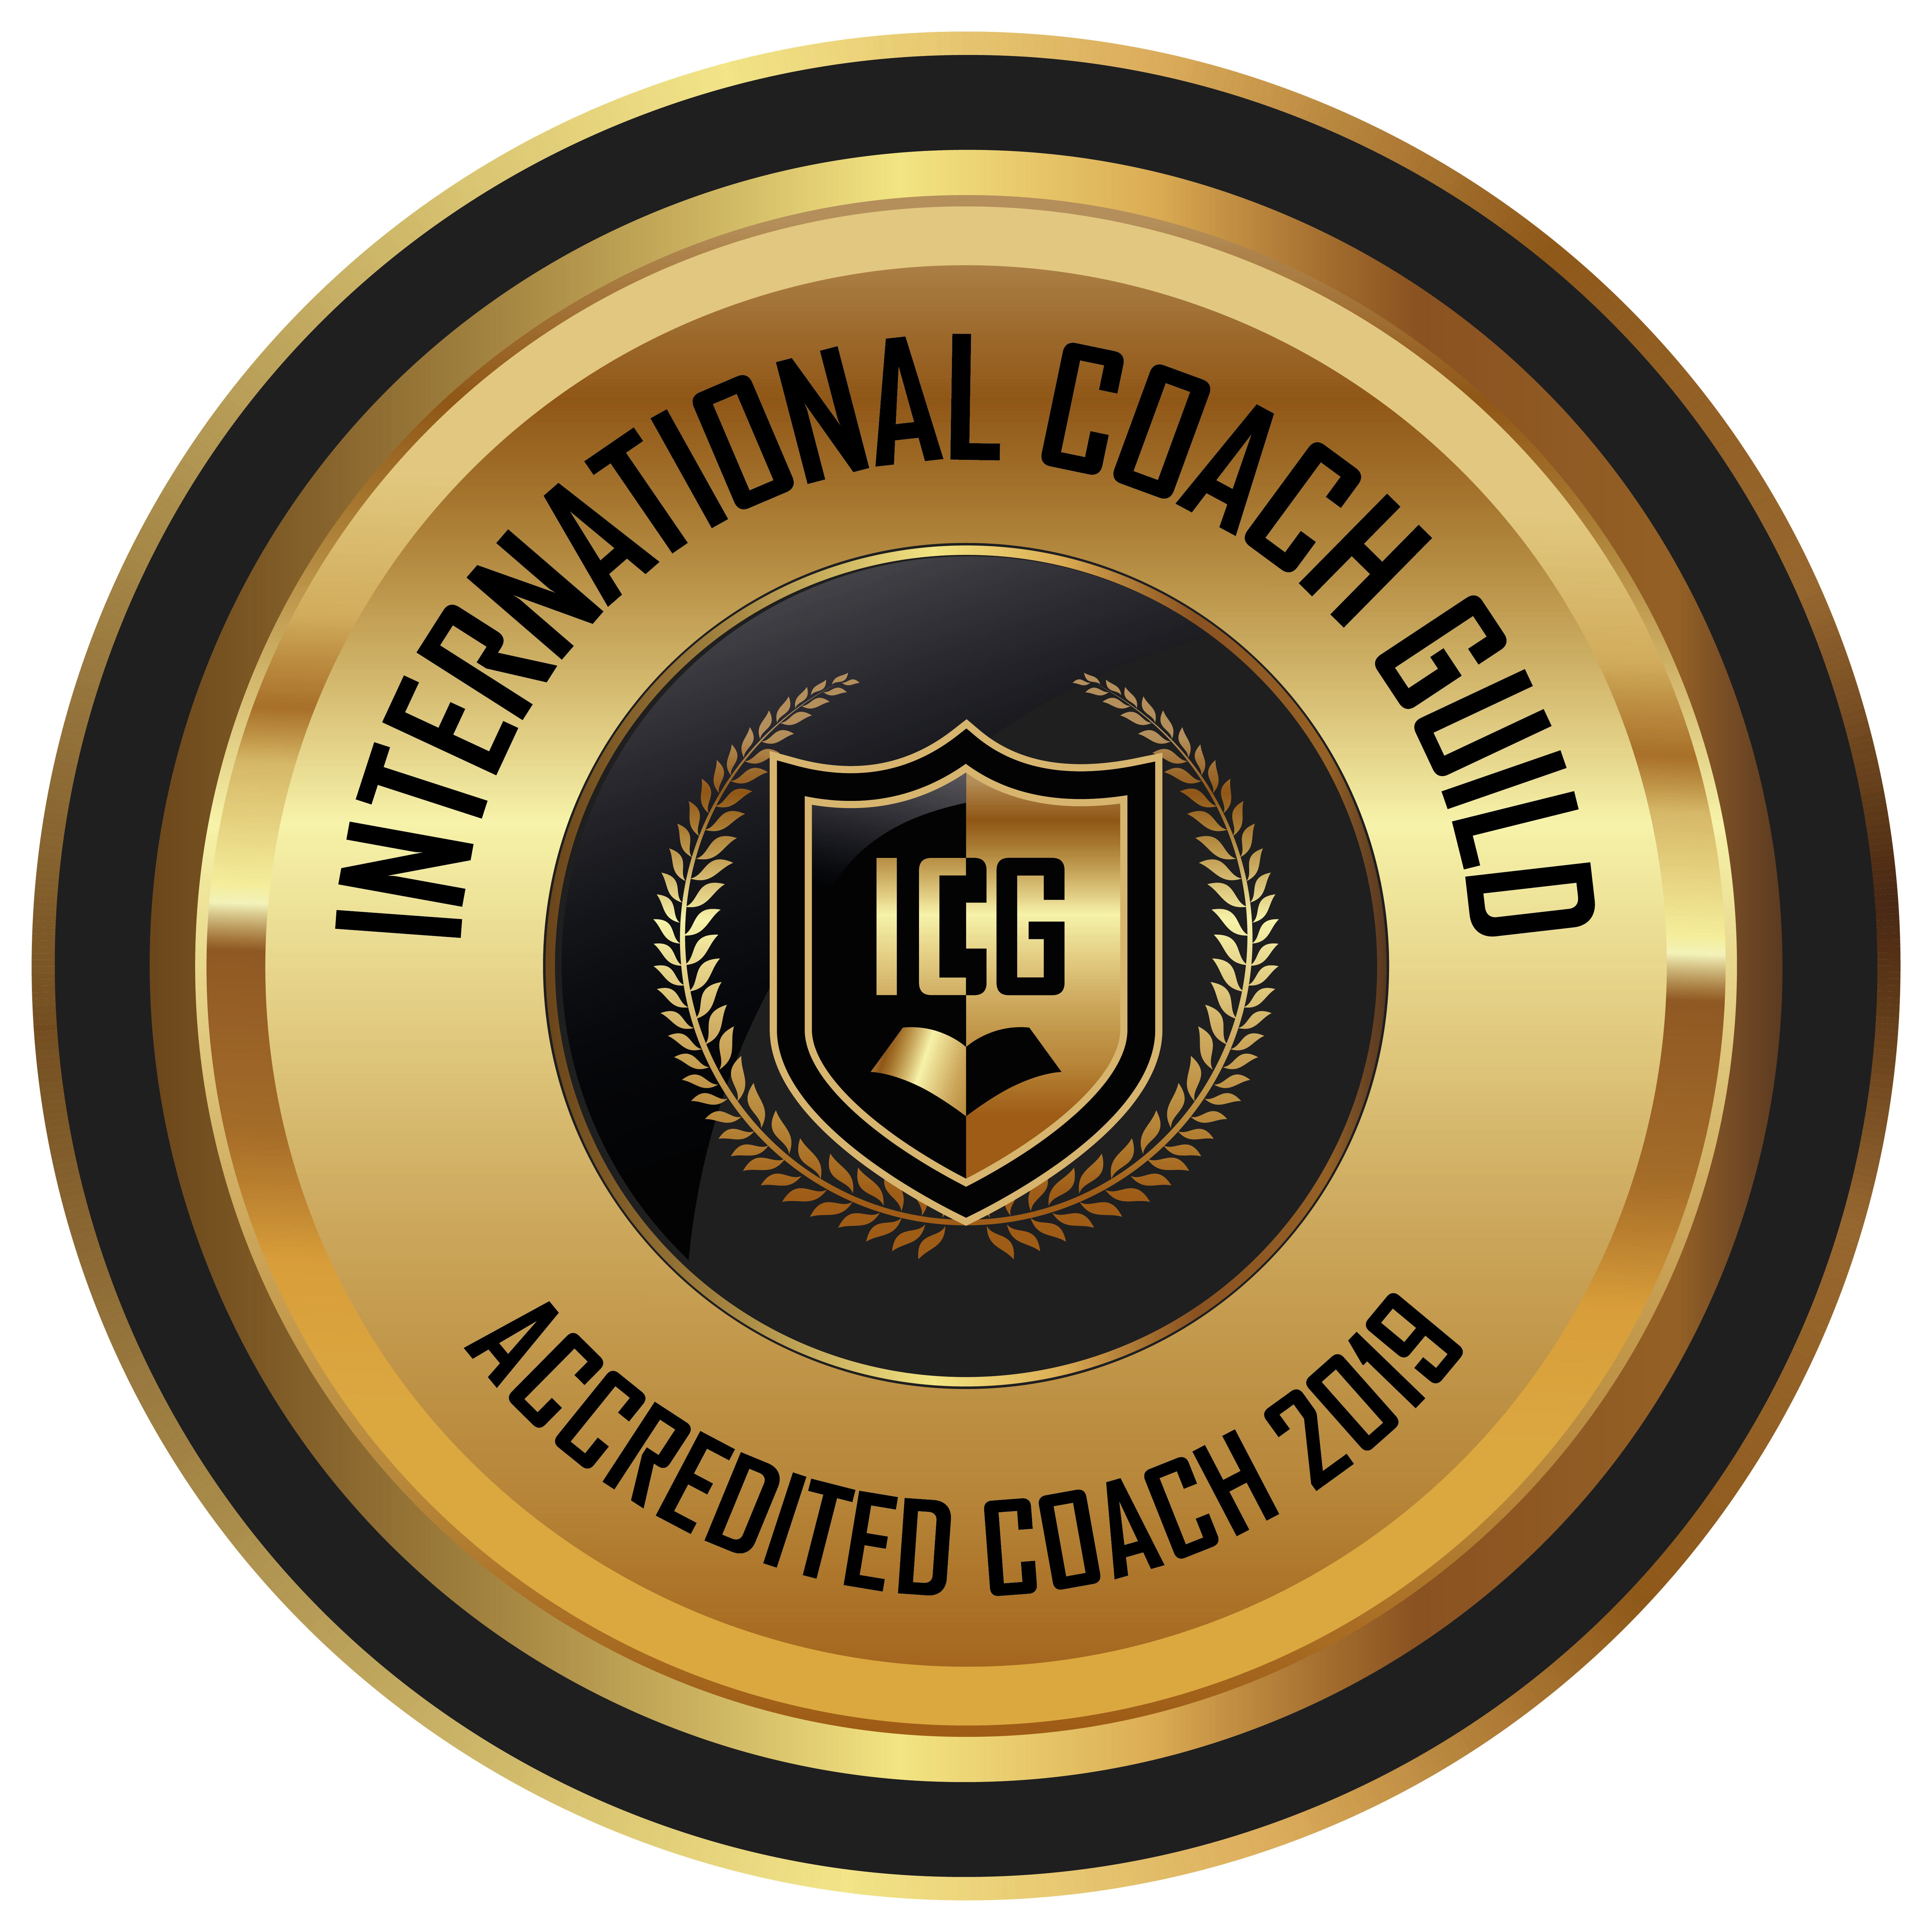 ICG Accredited Coach 2019 Recognised Member of the International Coach Guild